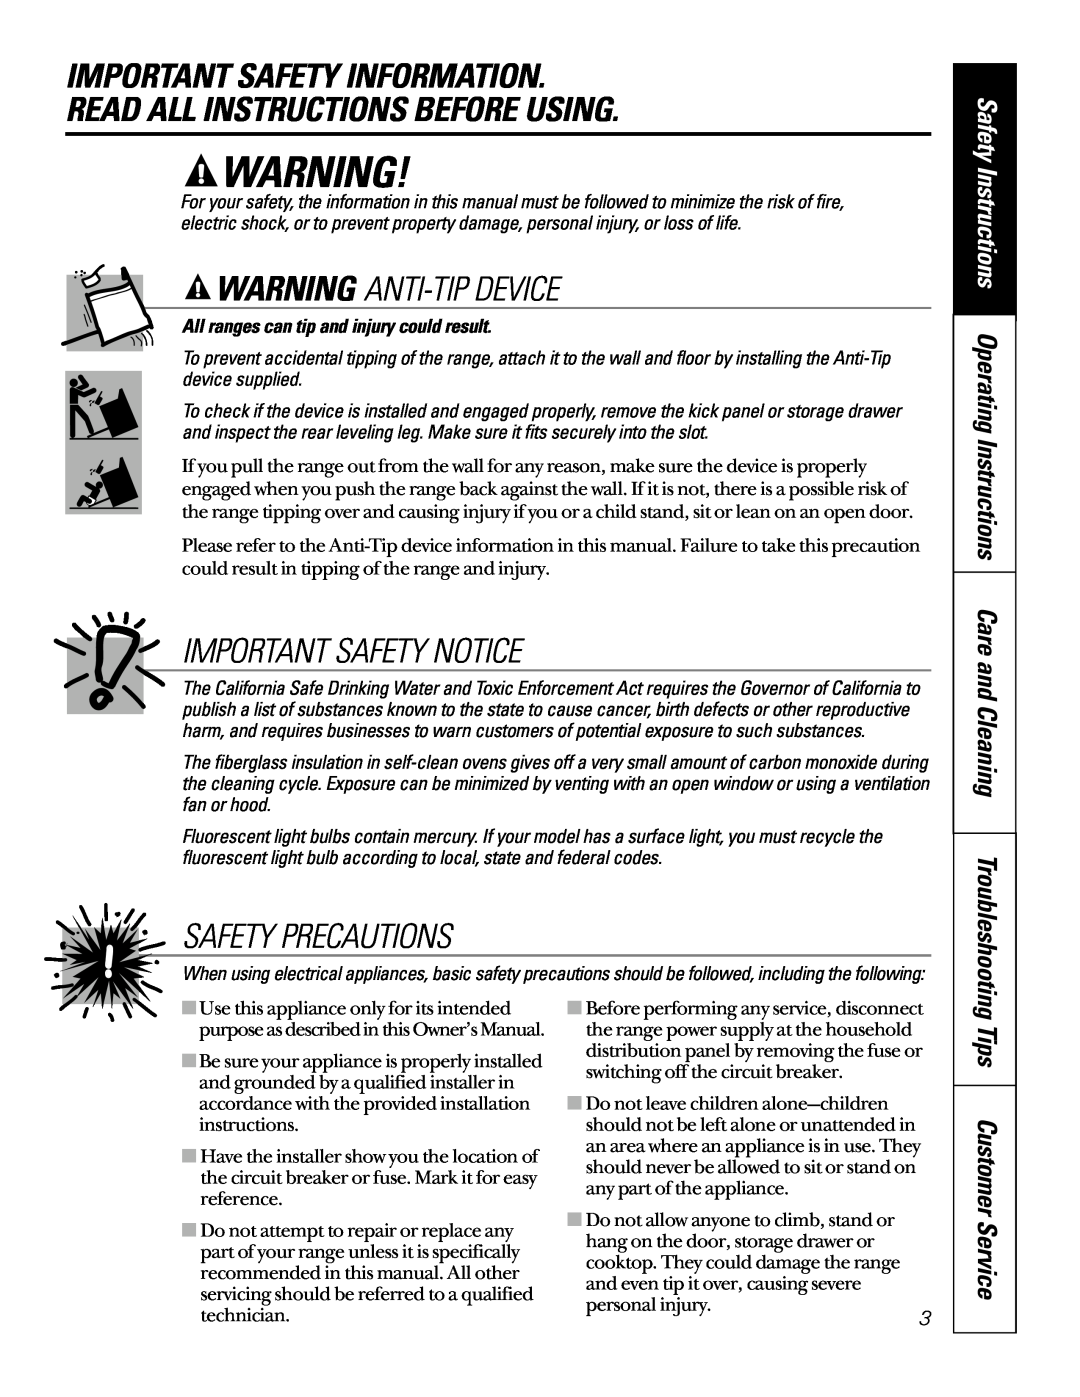 GE JBP64 Important Safety Information Read All Instructions Before Using, Warning Anti-Tip Device, Important Safety Notice 